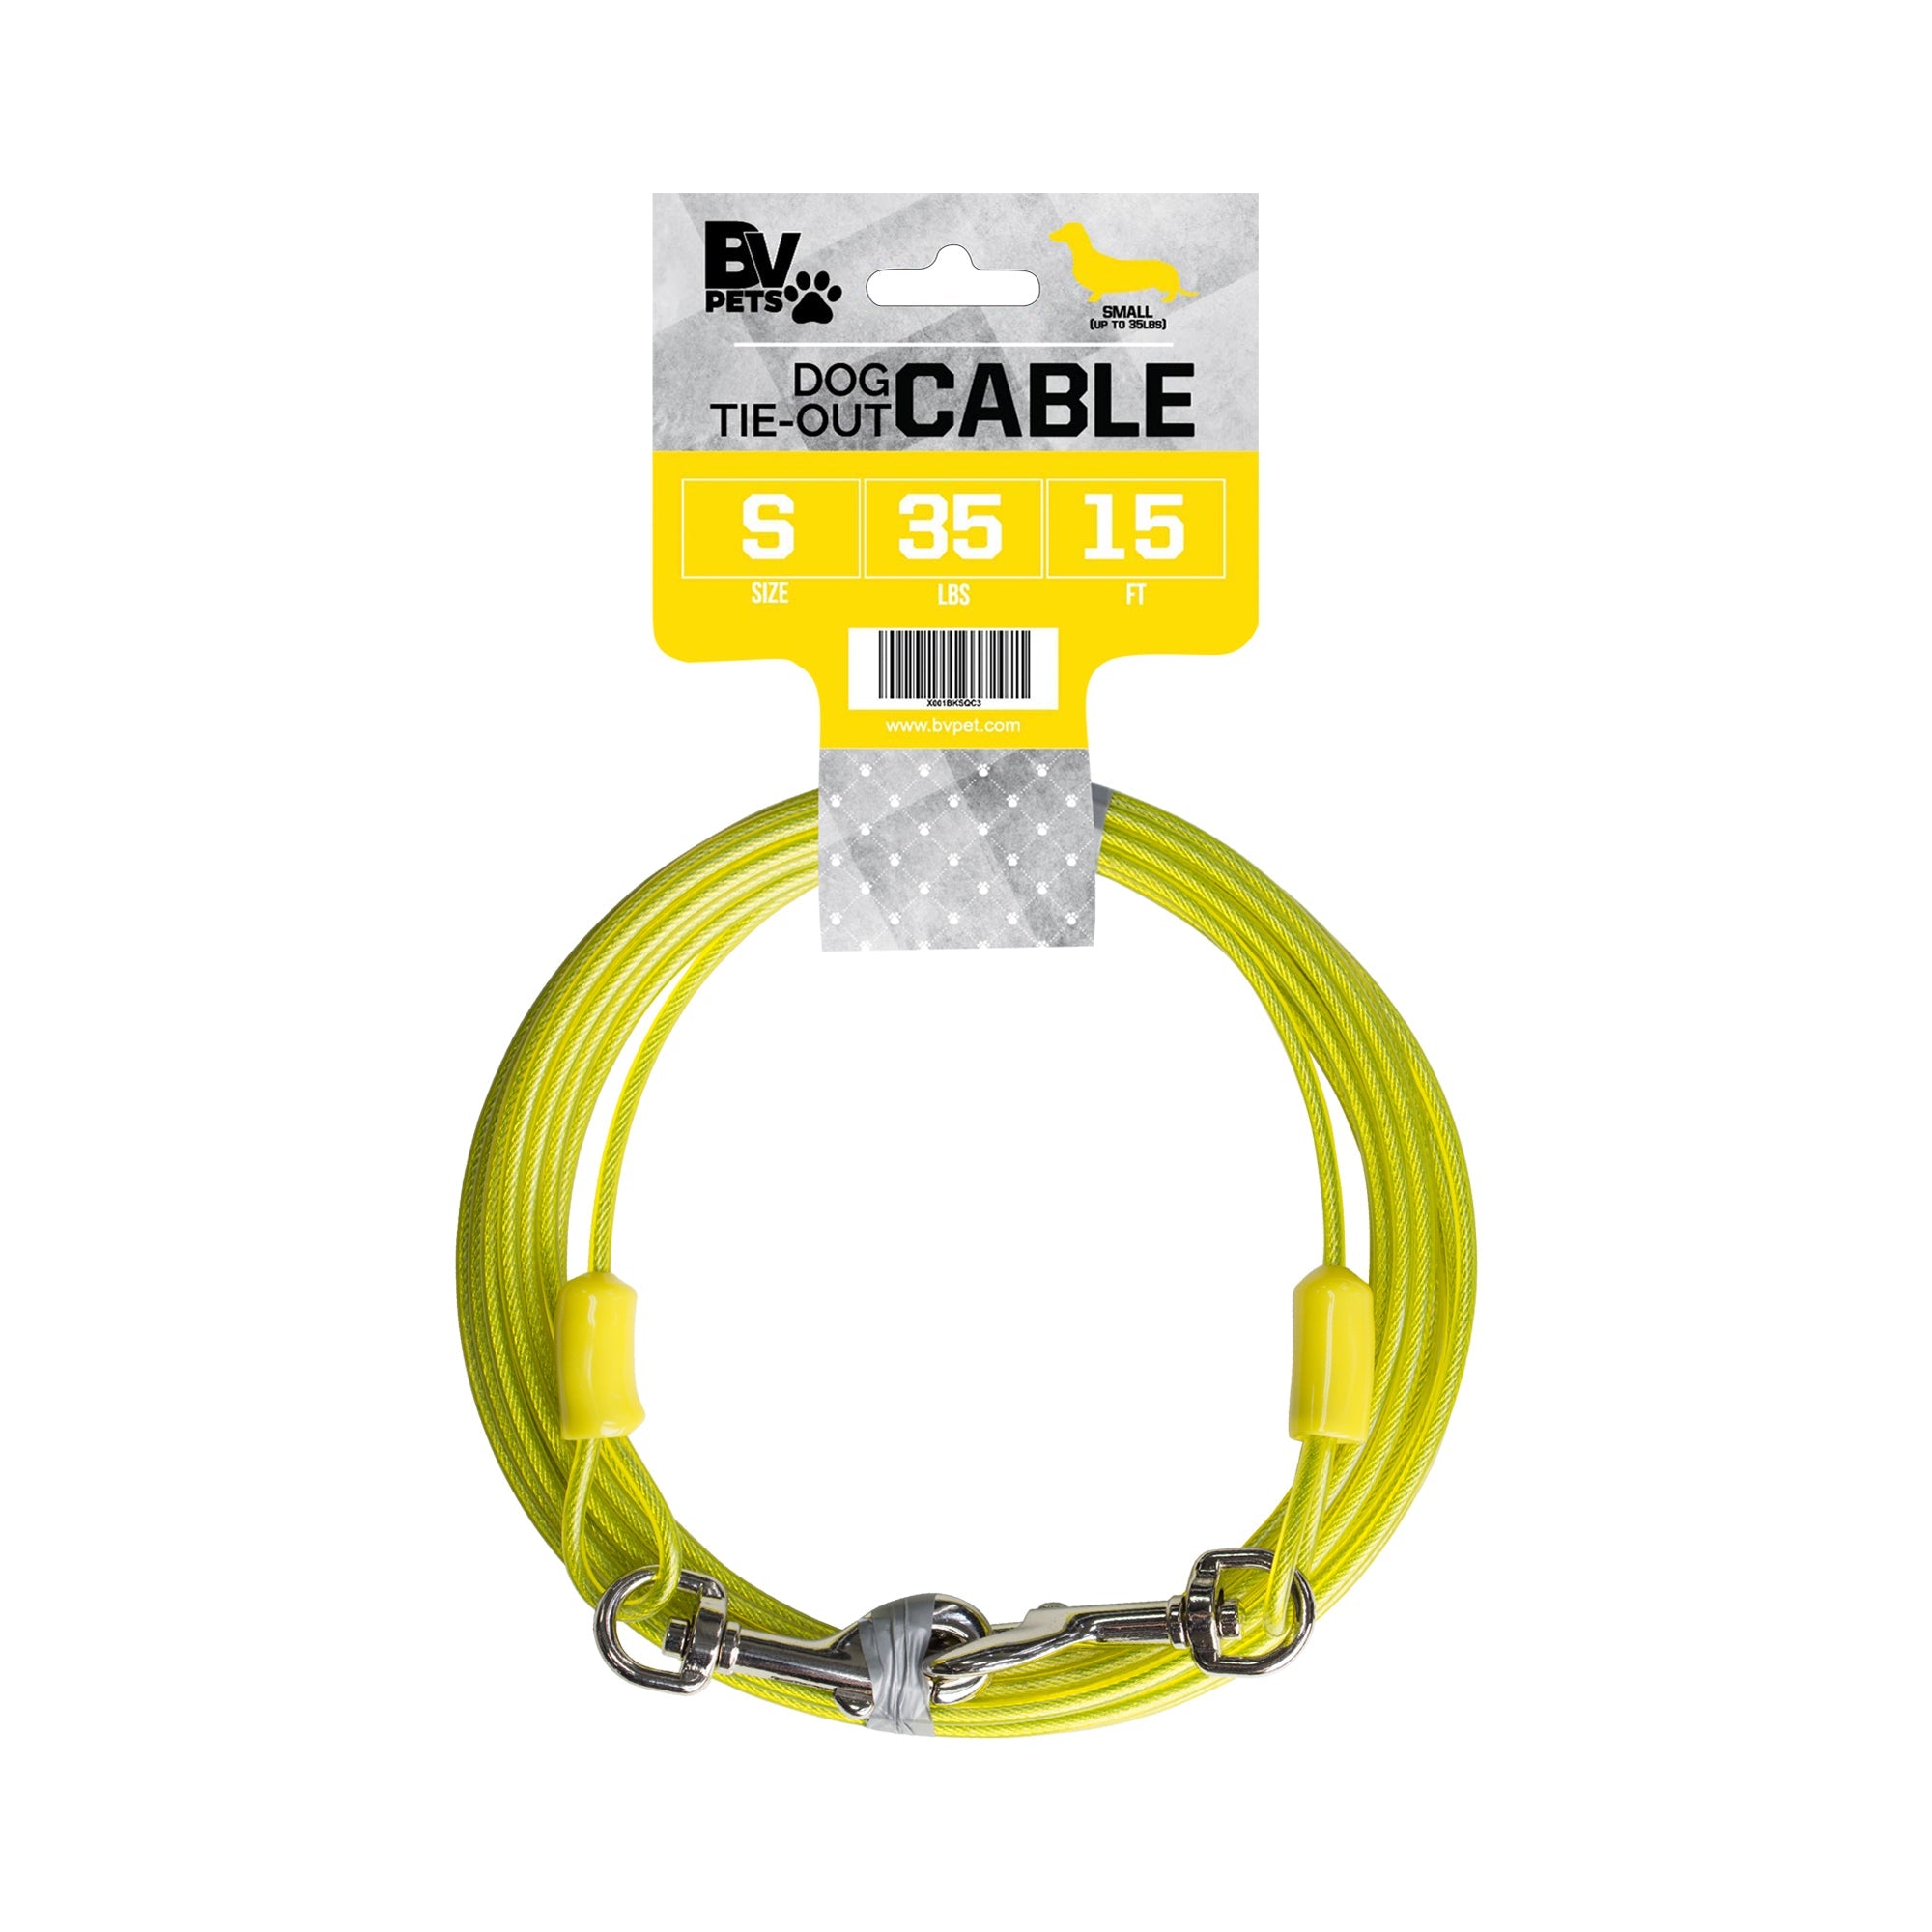 BV Pet Small Tie Out Cable - for Dogs up to 35Lbs - 15ft